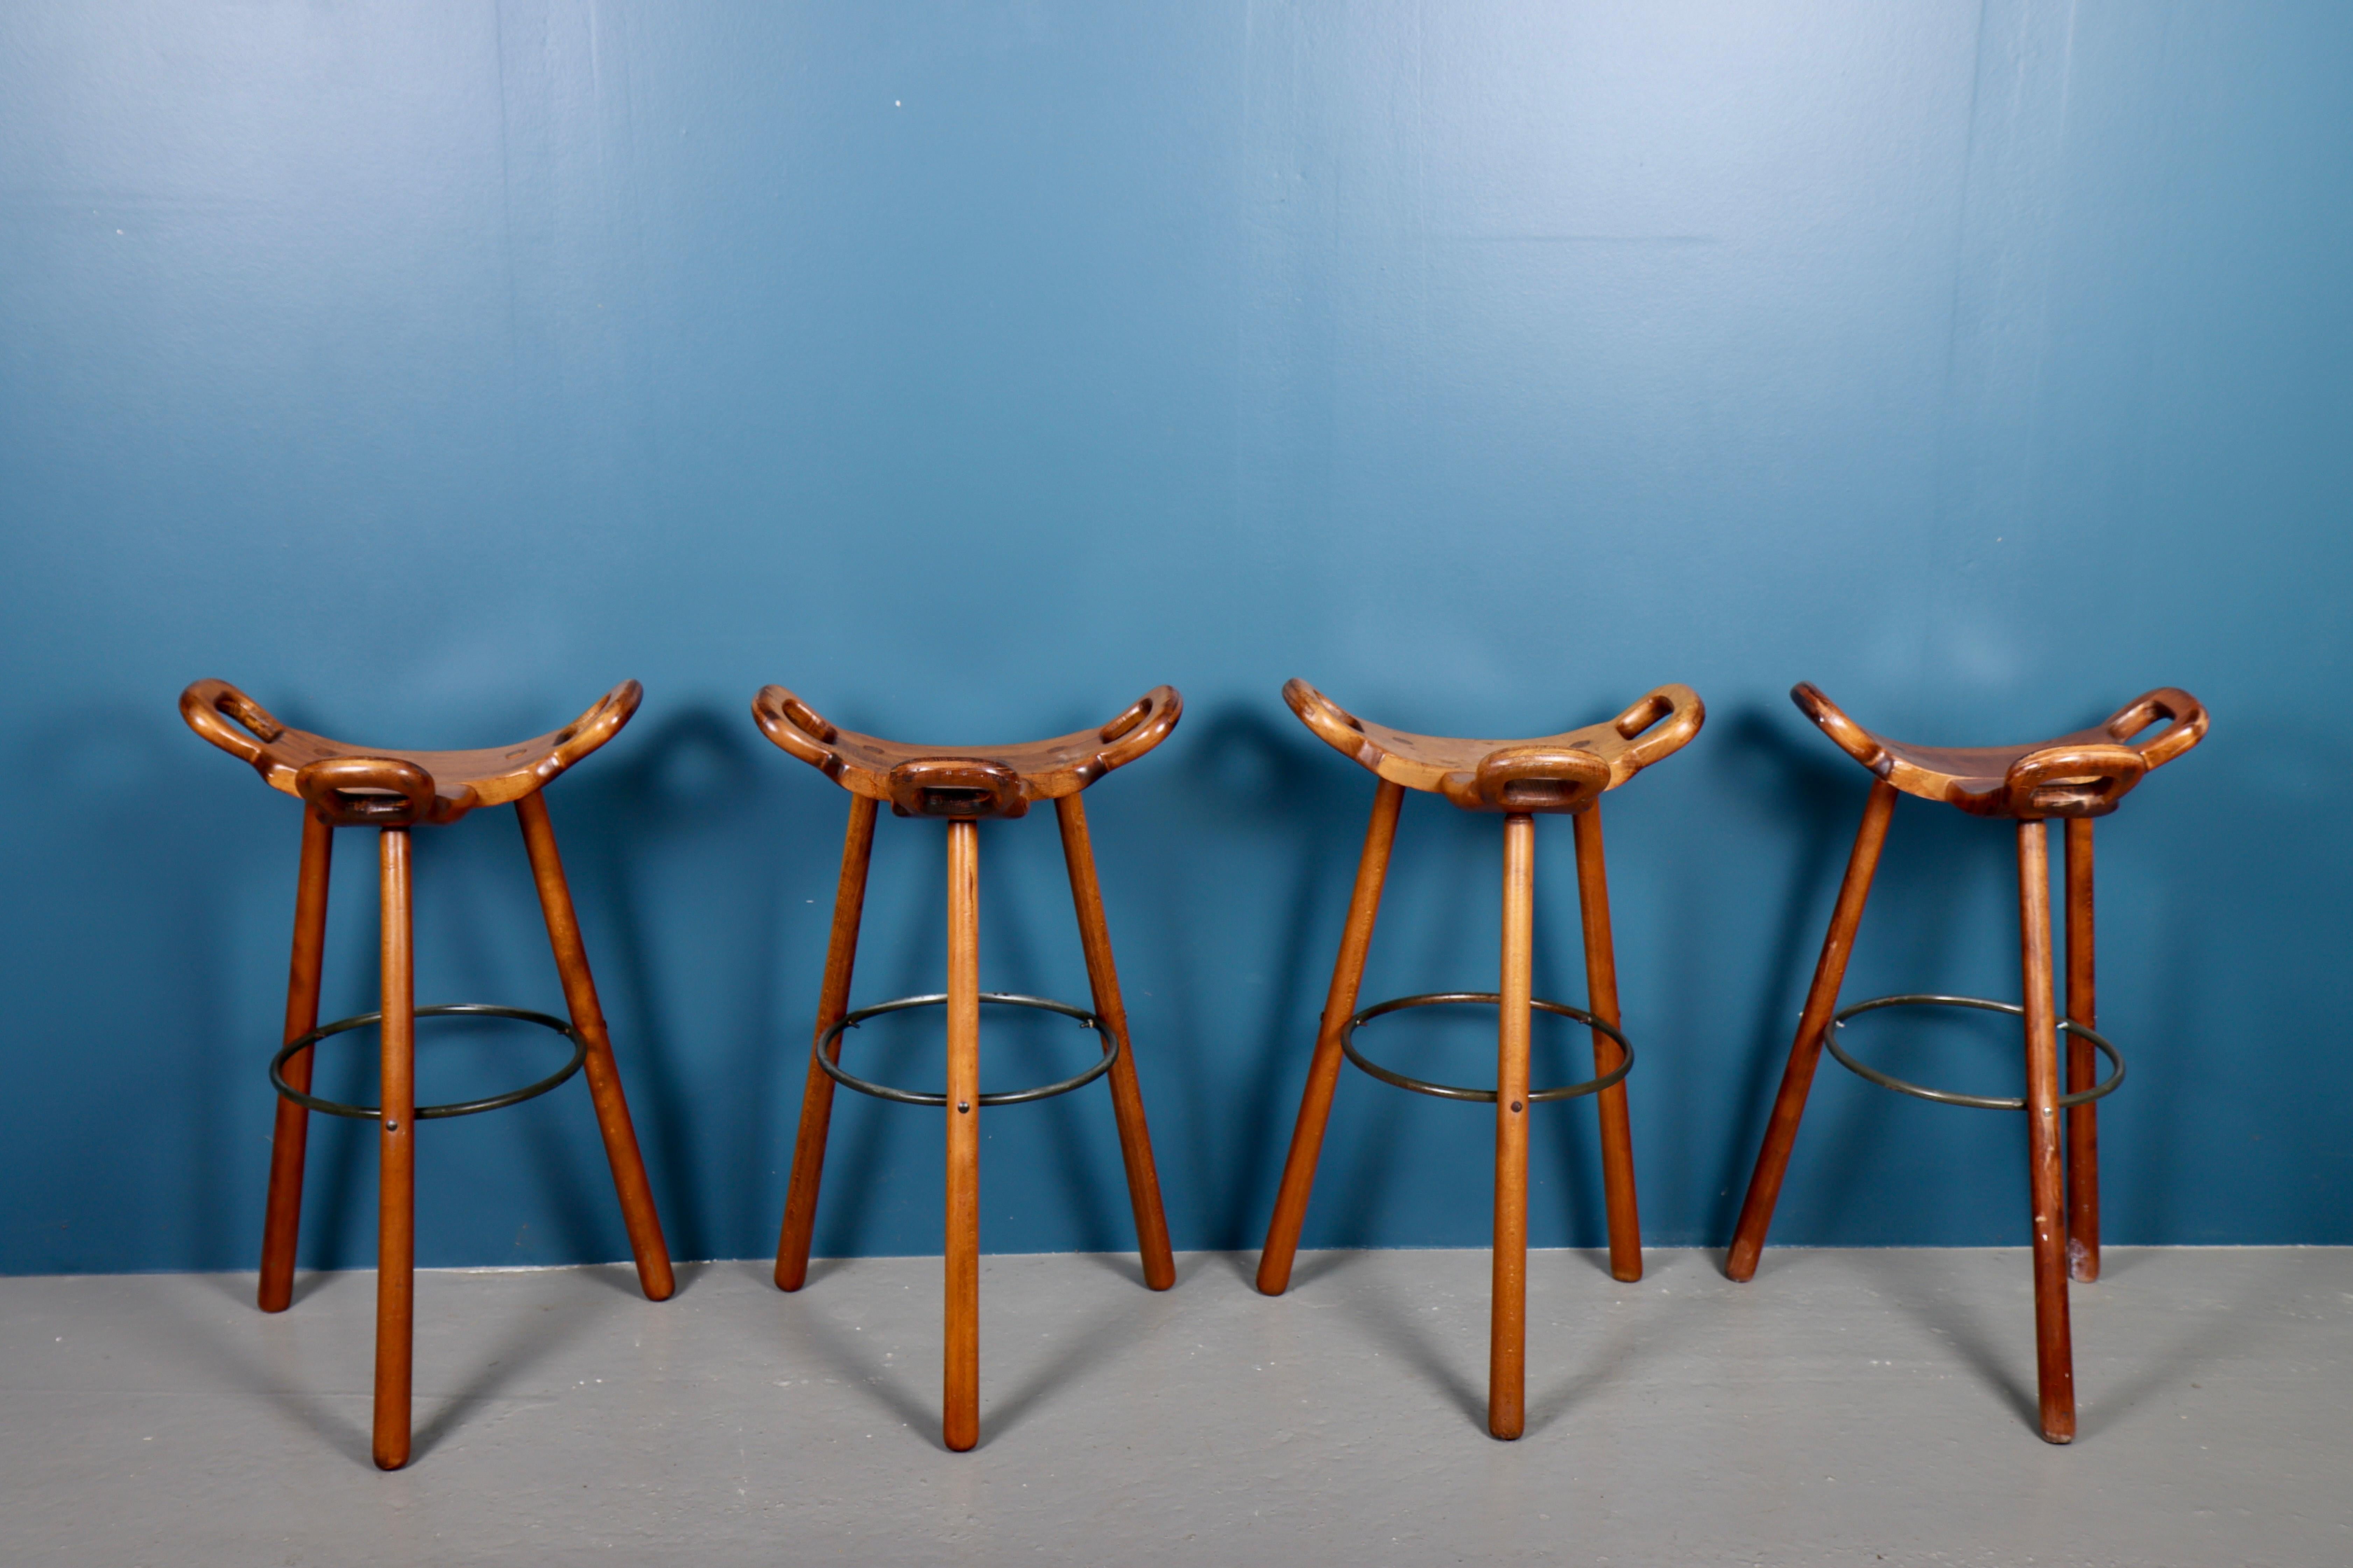 Set of four barstools in solid wood. Designed and made in Spain. Great original condition. Perfect for a bar or kitchen use.